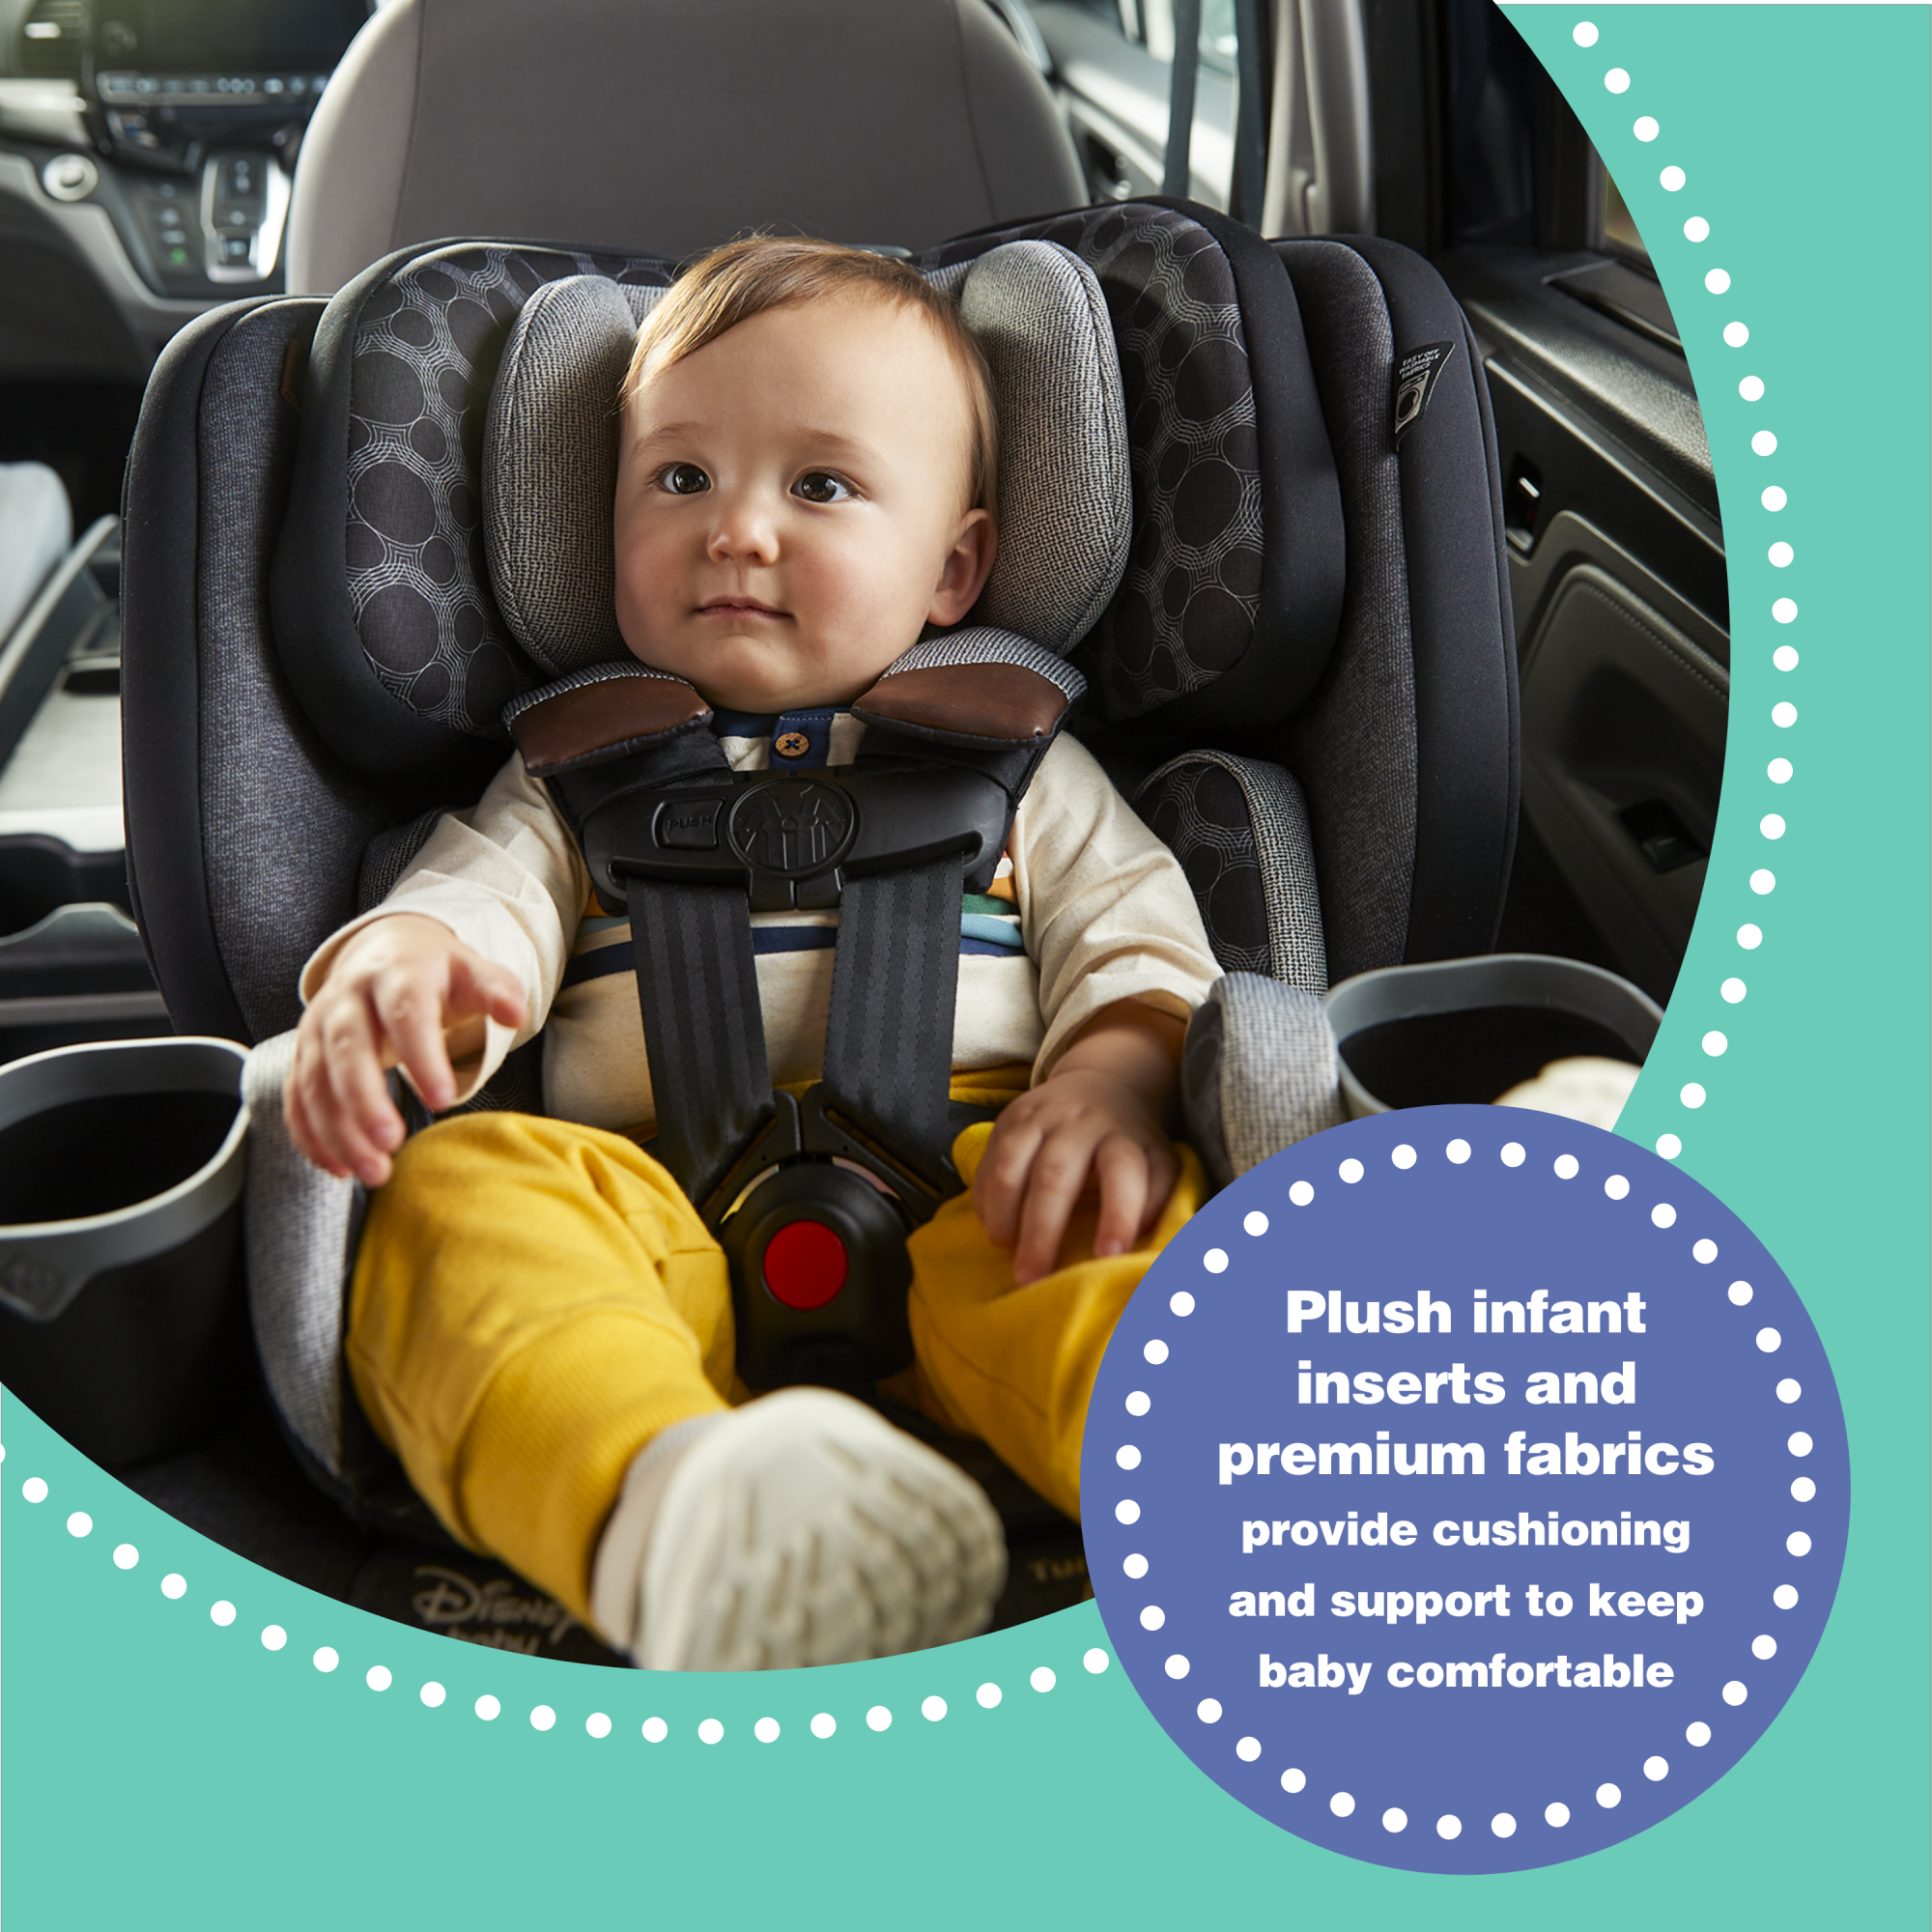 Disney Baby Turn and Go 360 Rotating All-in-One Convertible Car Seat - plush infant inserts and premium fabrics provide cushioning and support to keep baby comfortable